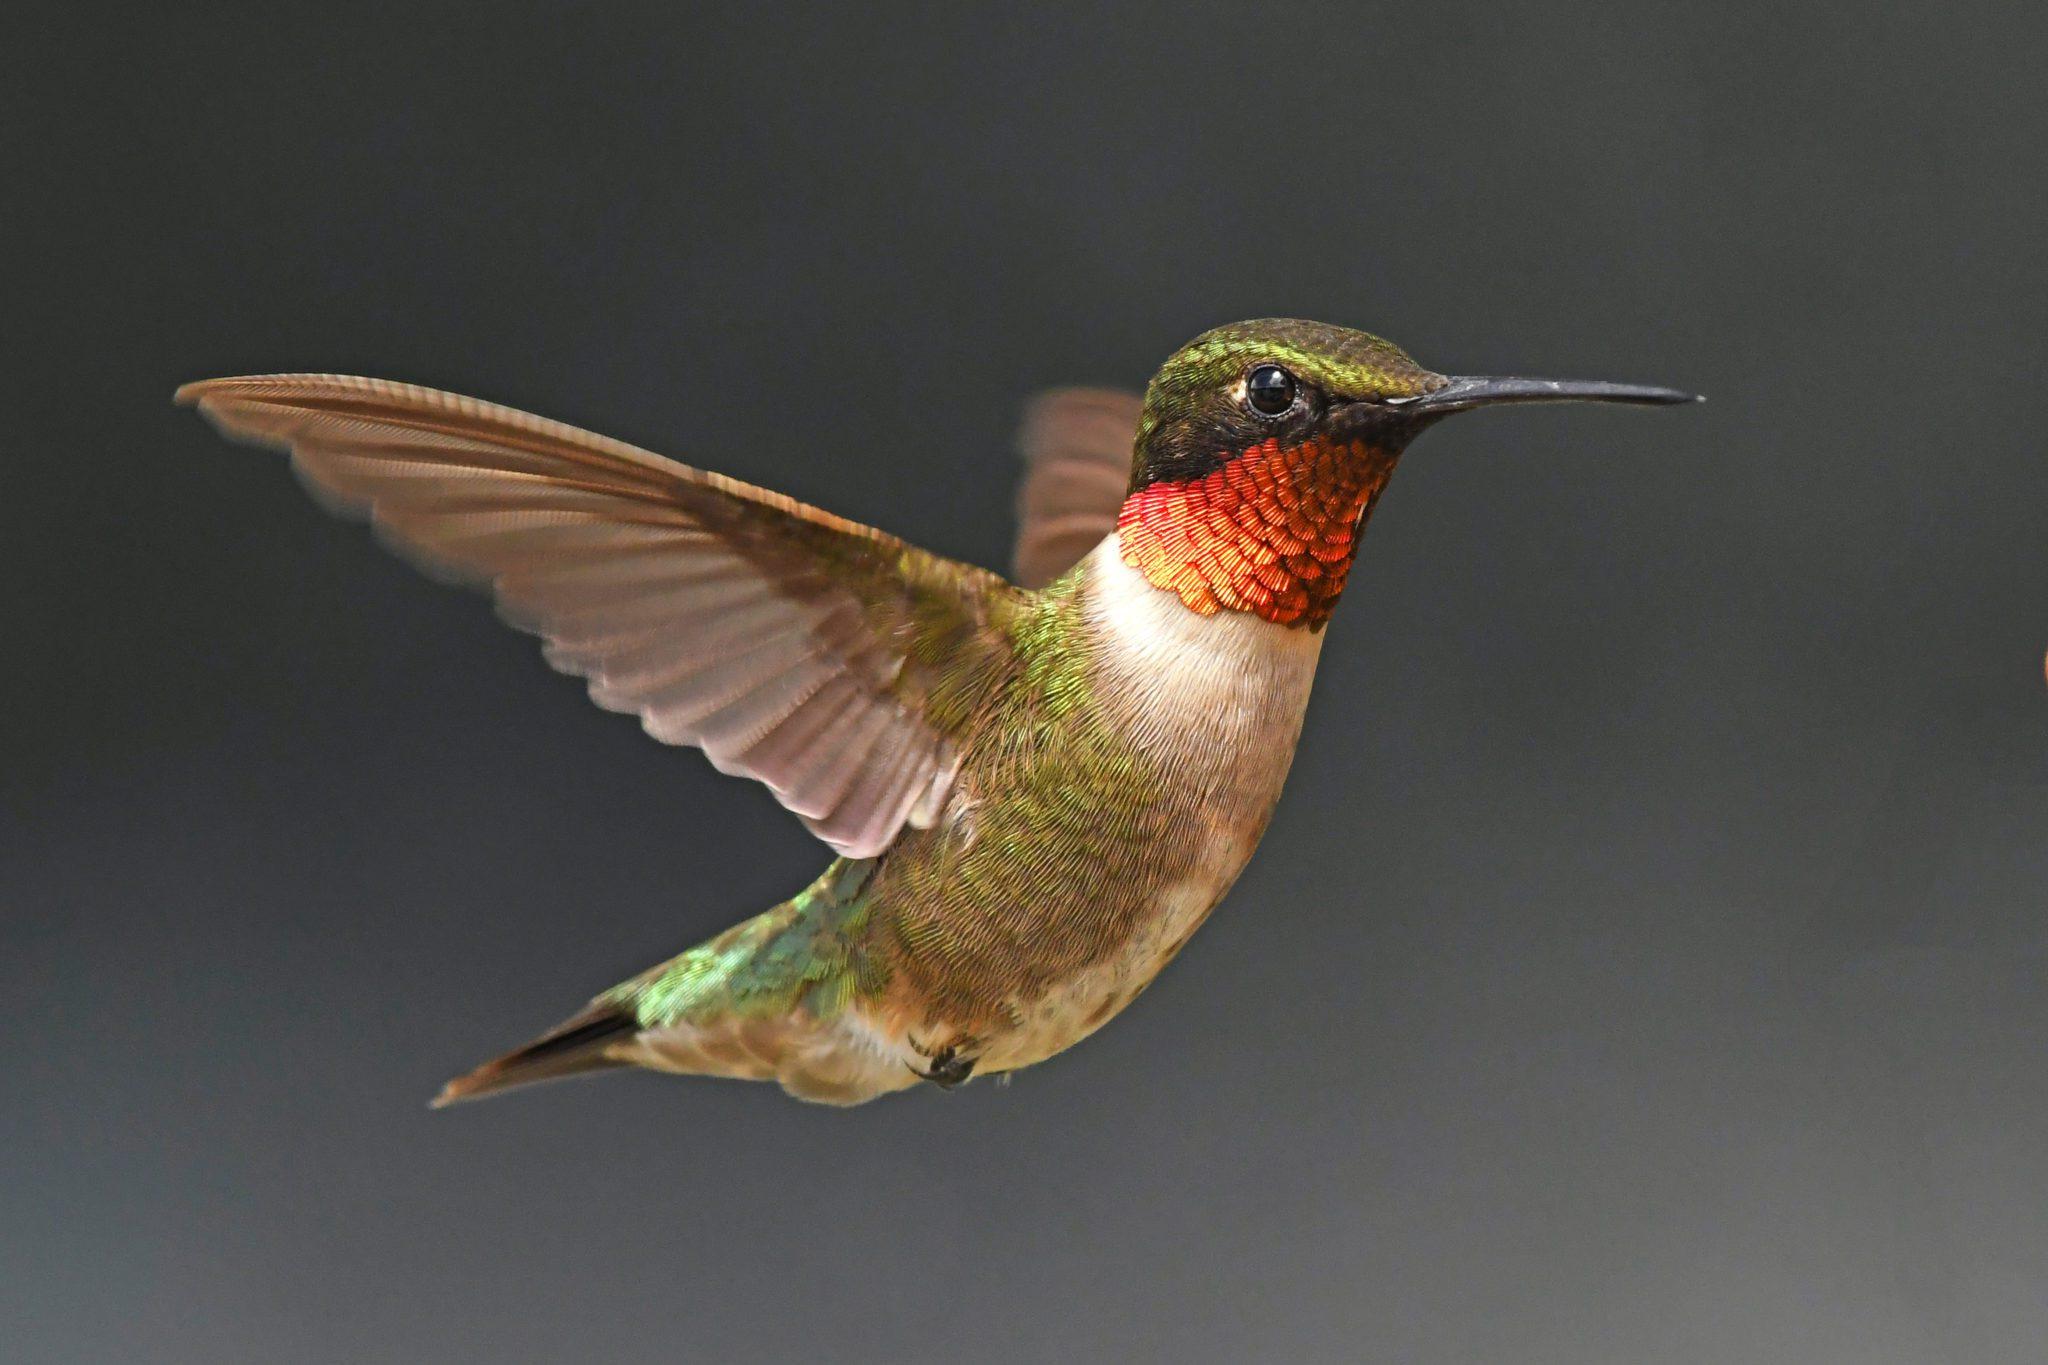 When do hummingbirds leave Indiana for migration?